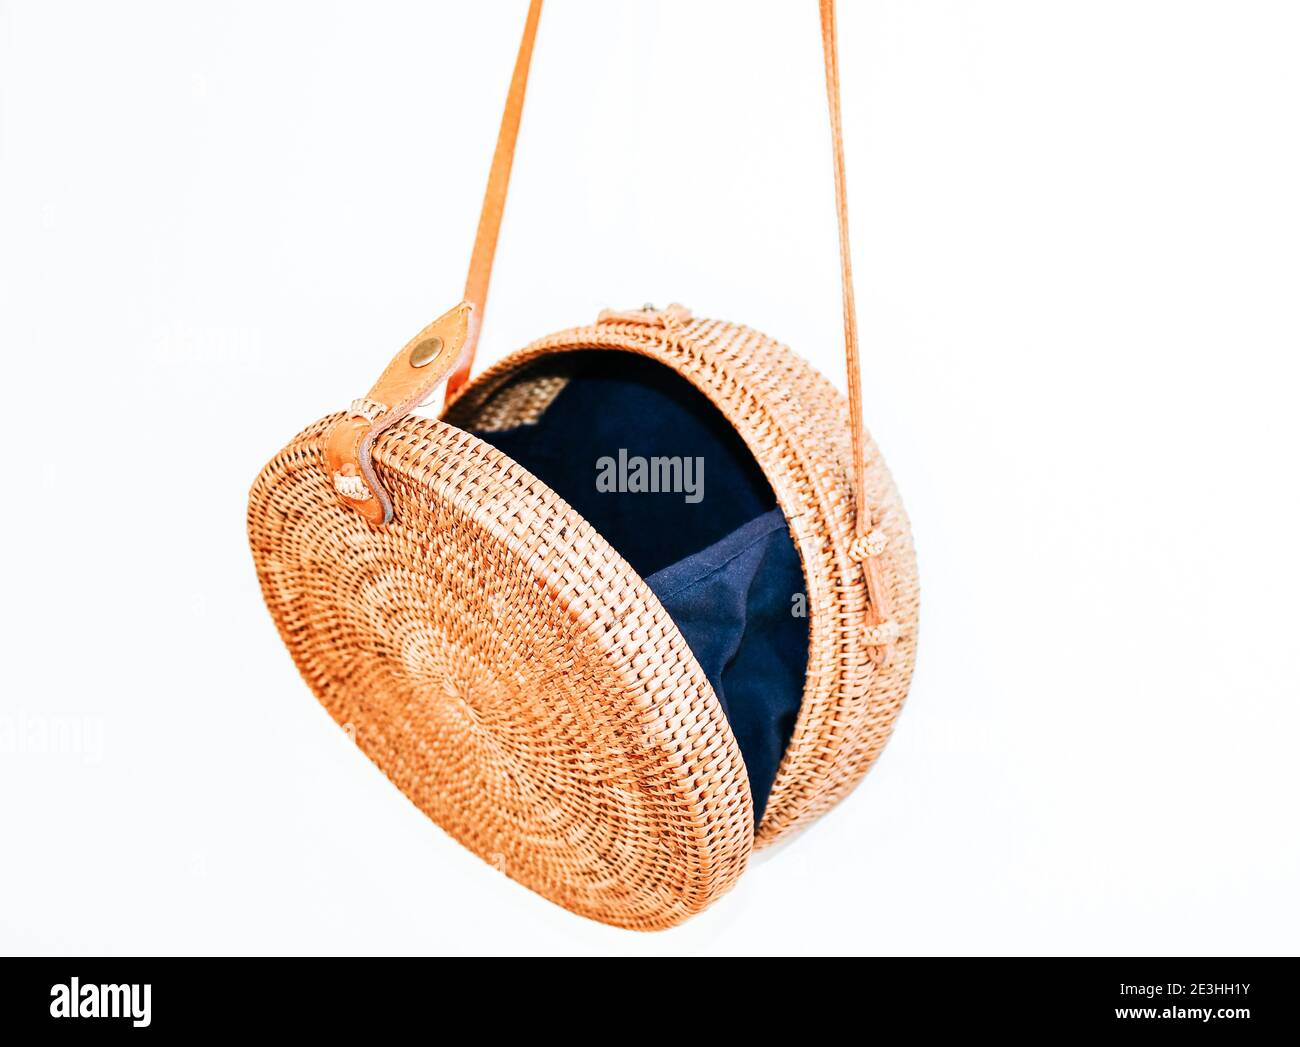 Opened round cross body rattan Ata bag with a leather strap and black lining Stock Photo